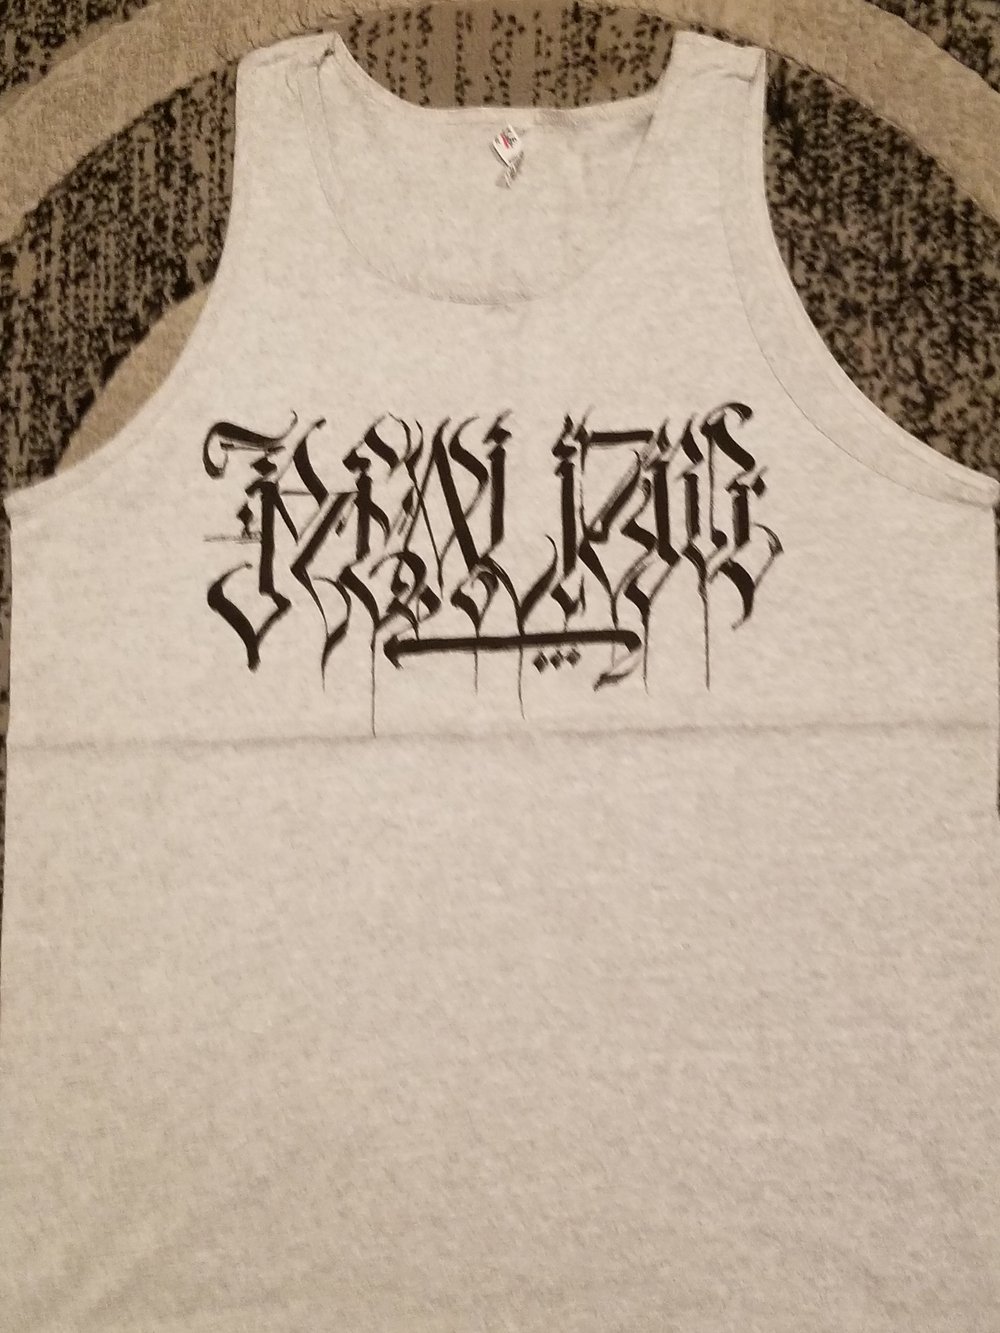 Realizm & Krazy Race Tank Tops (5 Different Designs)